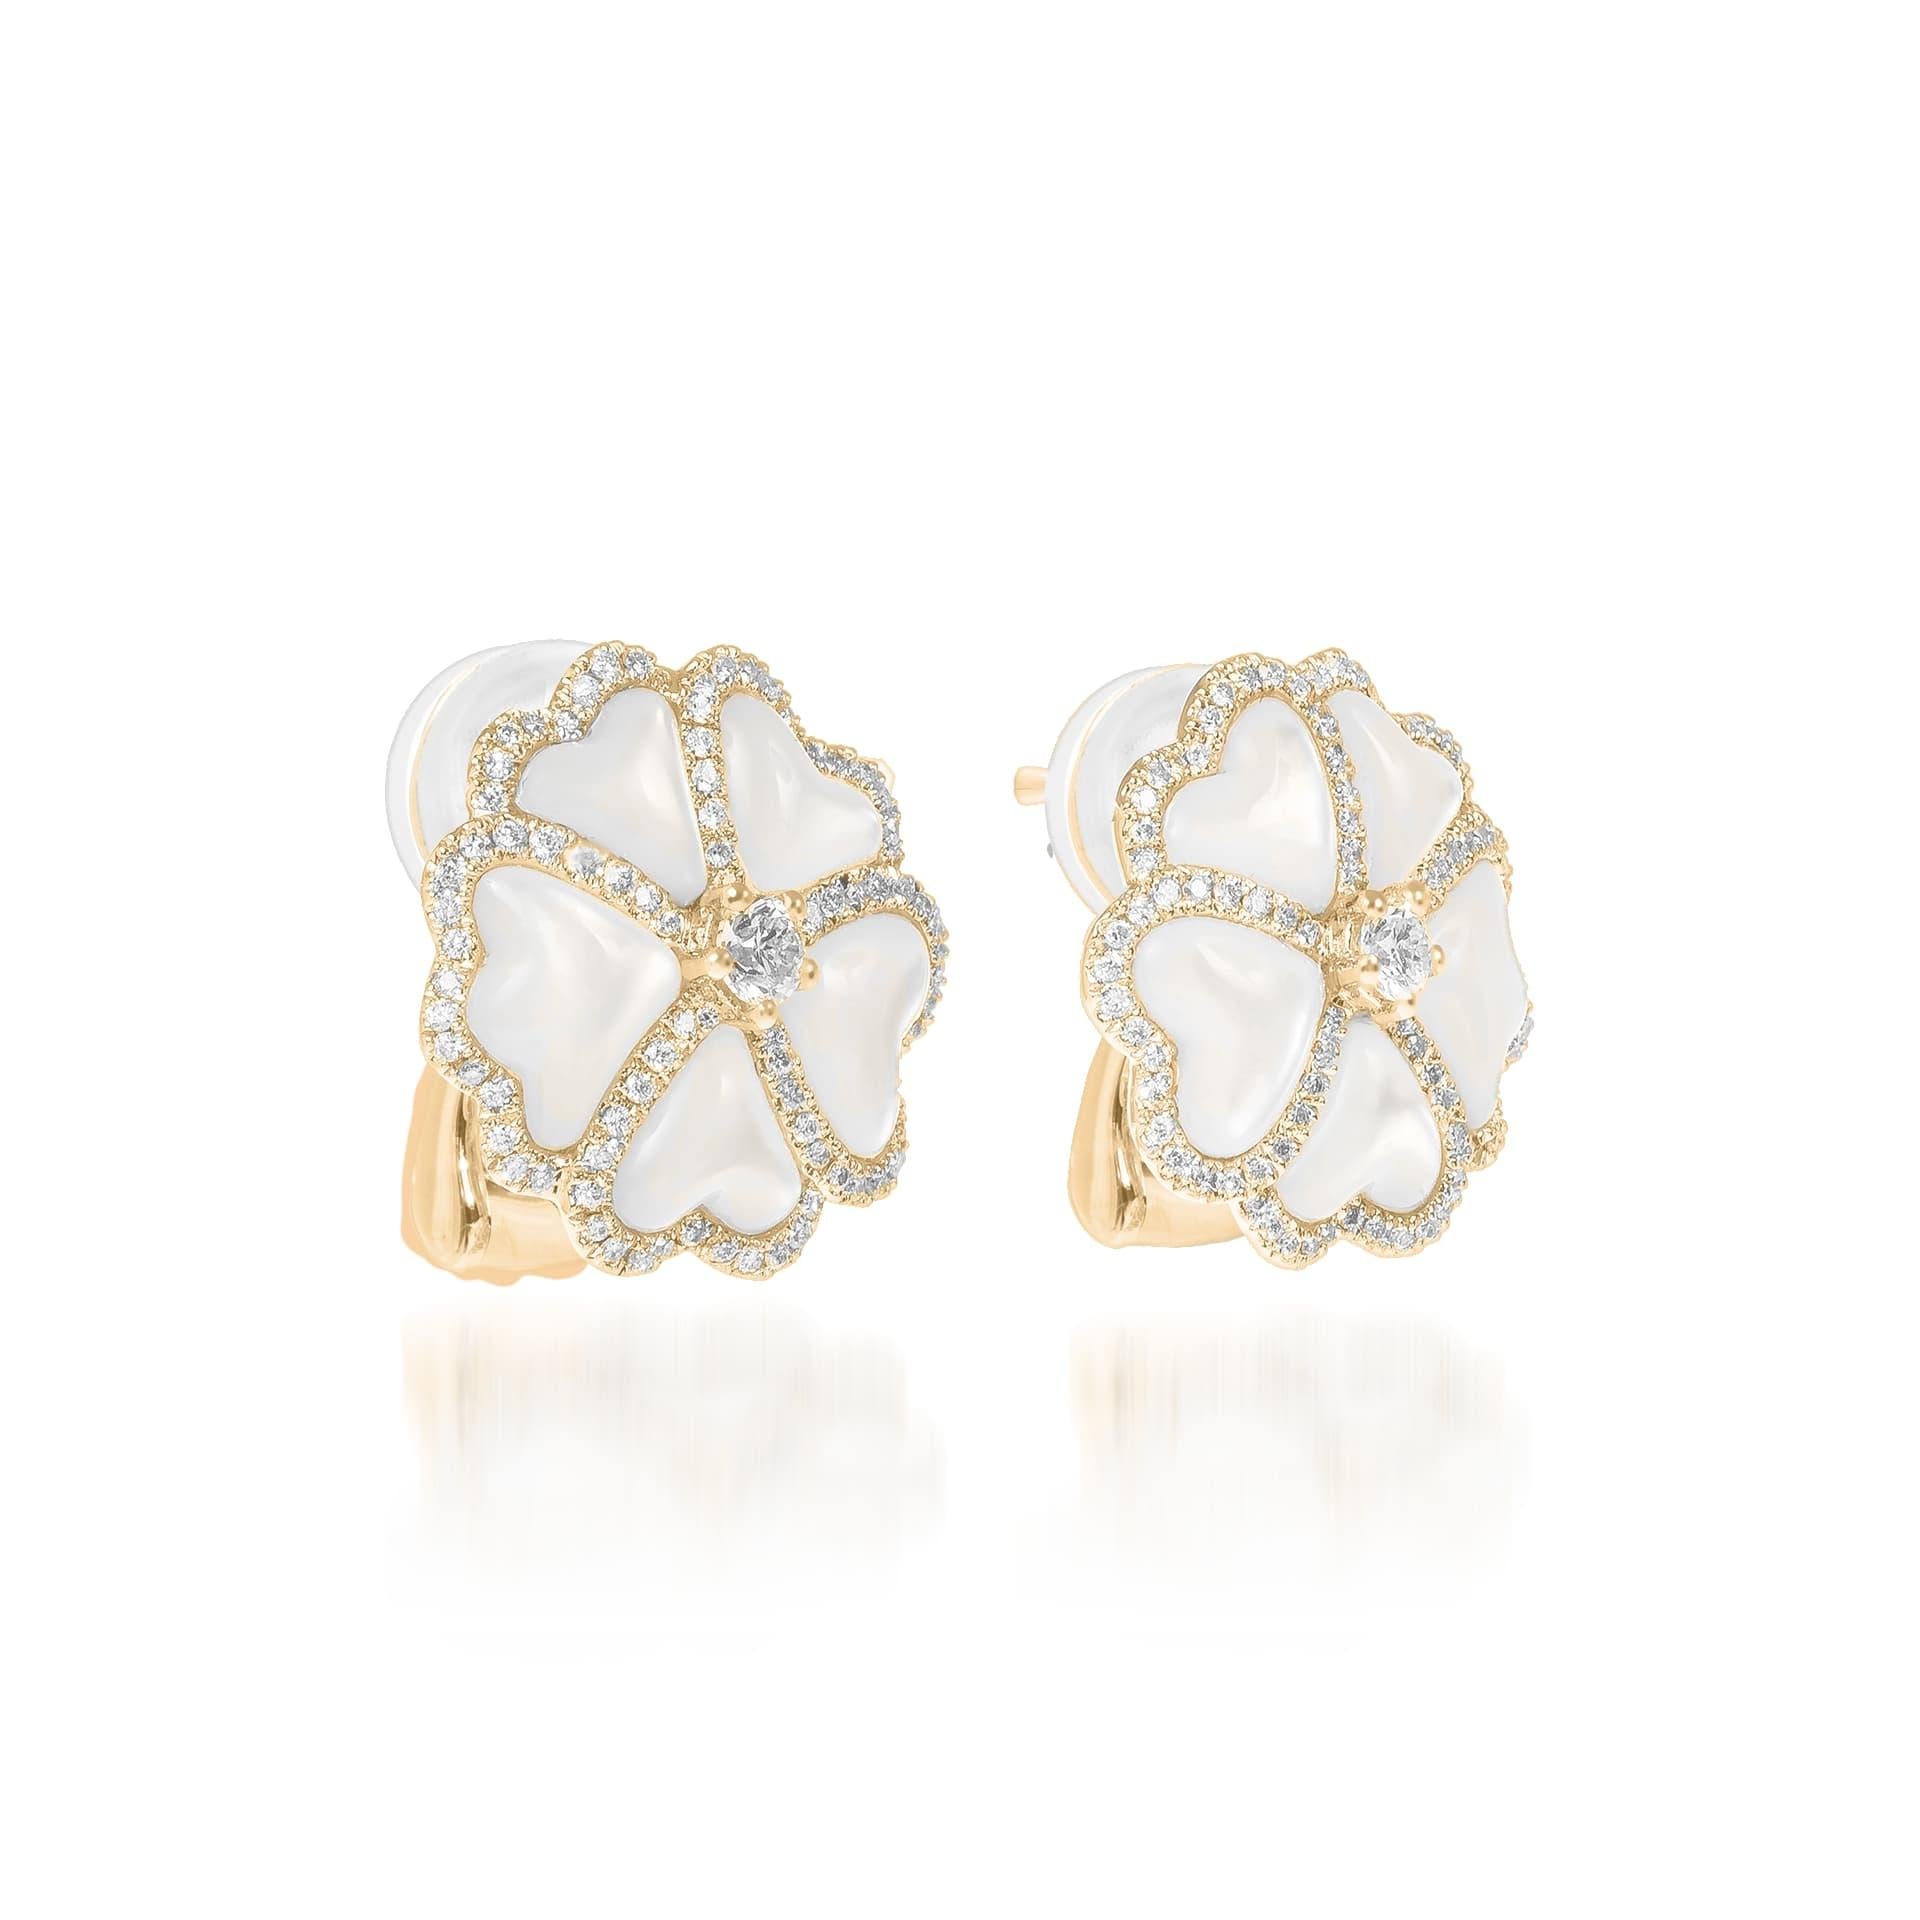 Bloom Diamond and White Mother-of-Pearl Flower Stud Earrings in 18K Yellow Gold

Inspired by the exquisite petals of the alpine cinquefoil flower, the Bloom collection combines the richness of diamonds and precious metals with the light versatility